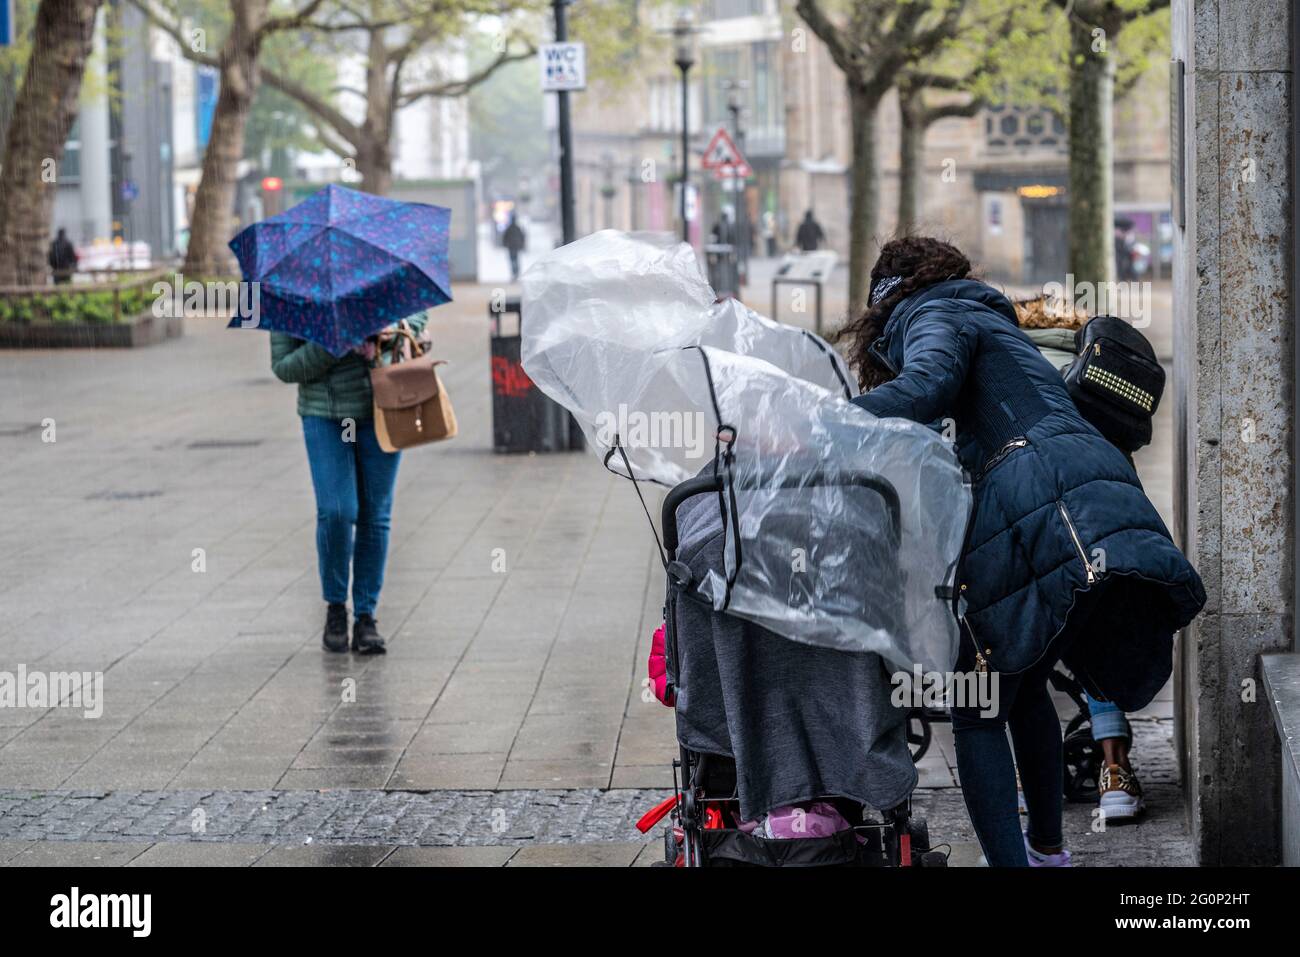 Rainy weather, rain shower, storm, a mother tries to cover the pram with a rain cover, spontaneous heavy rain shower, Kettwiger Strasse, downtown Esse Stock Photo